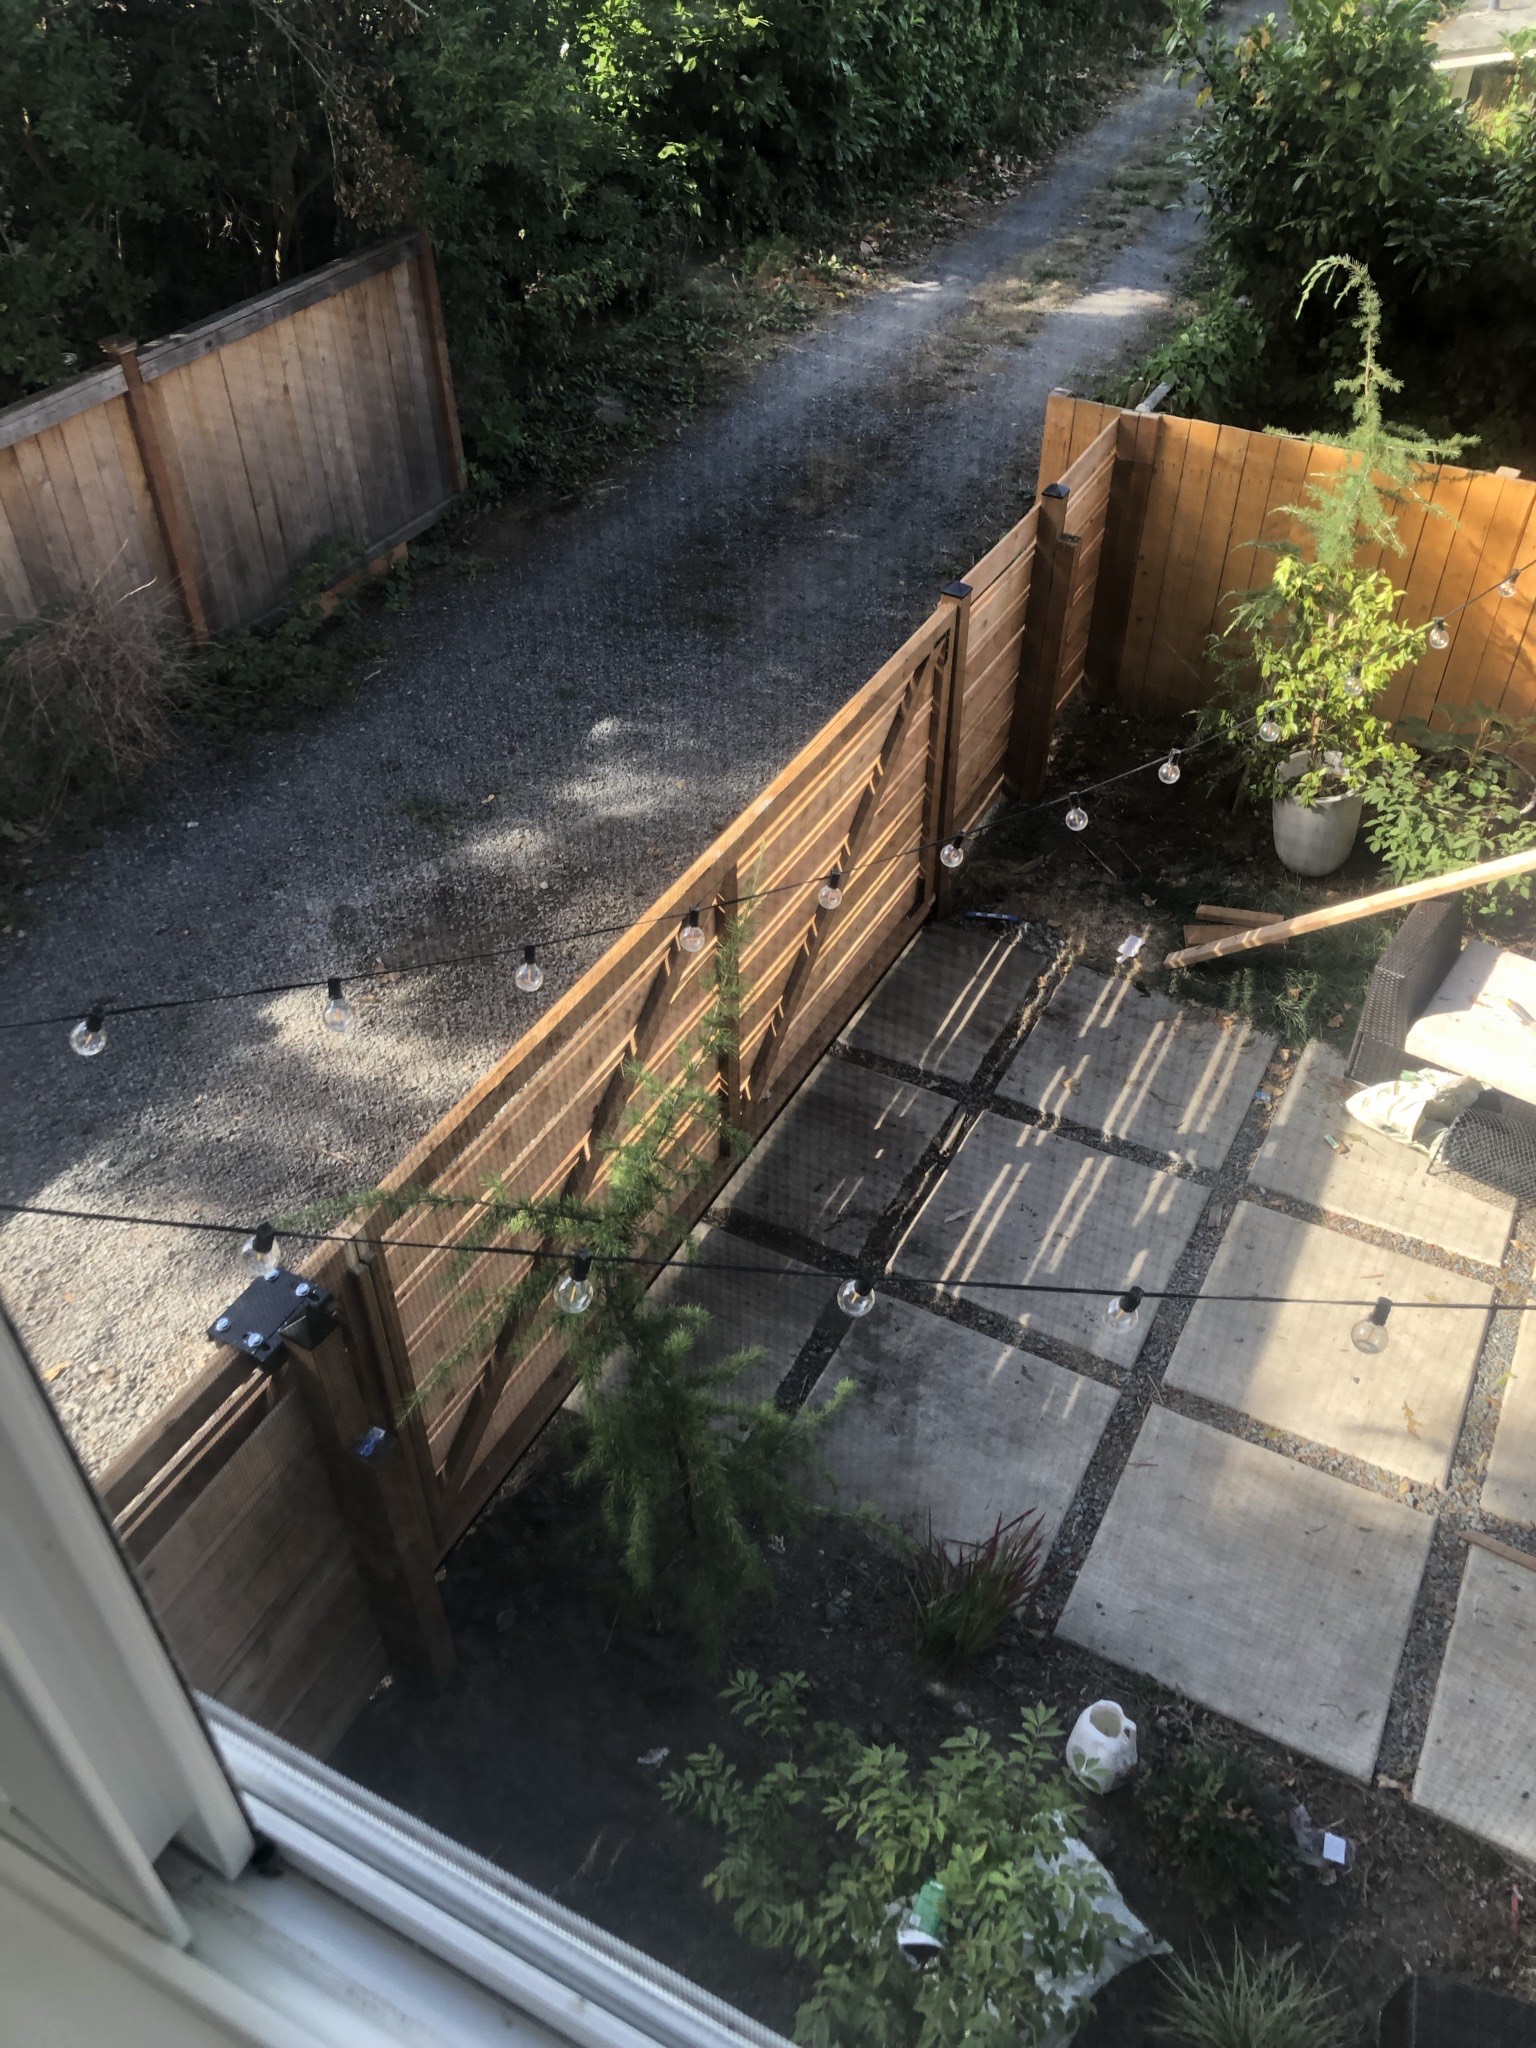 View of gate from 2nd story of home